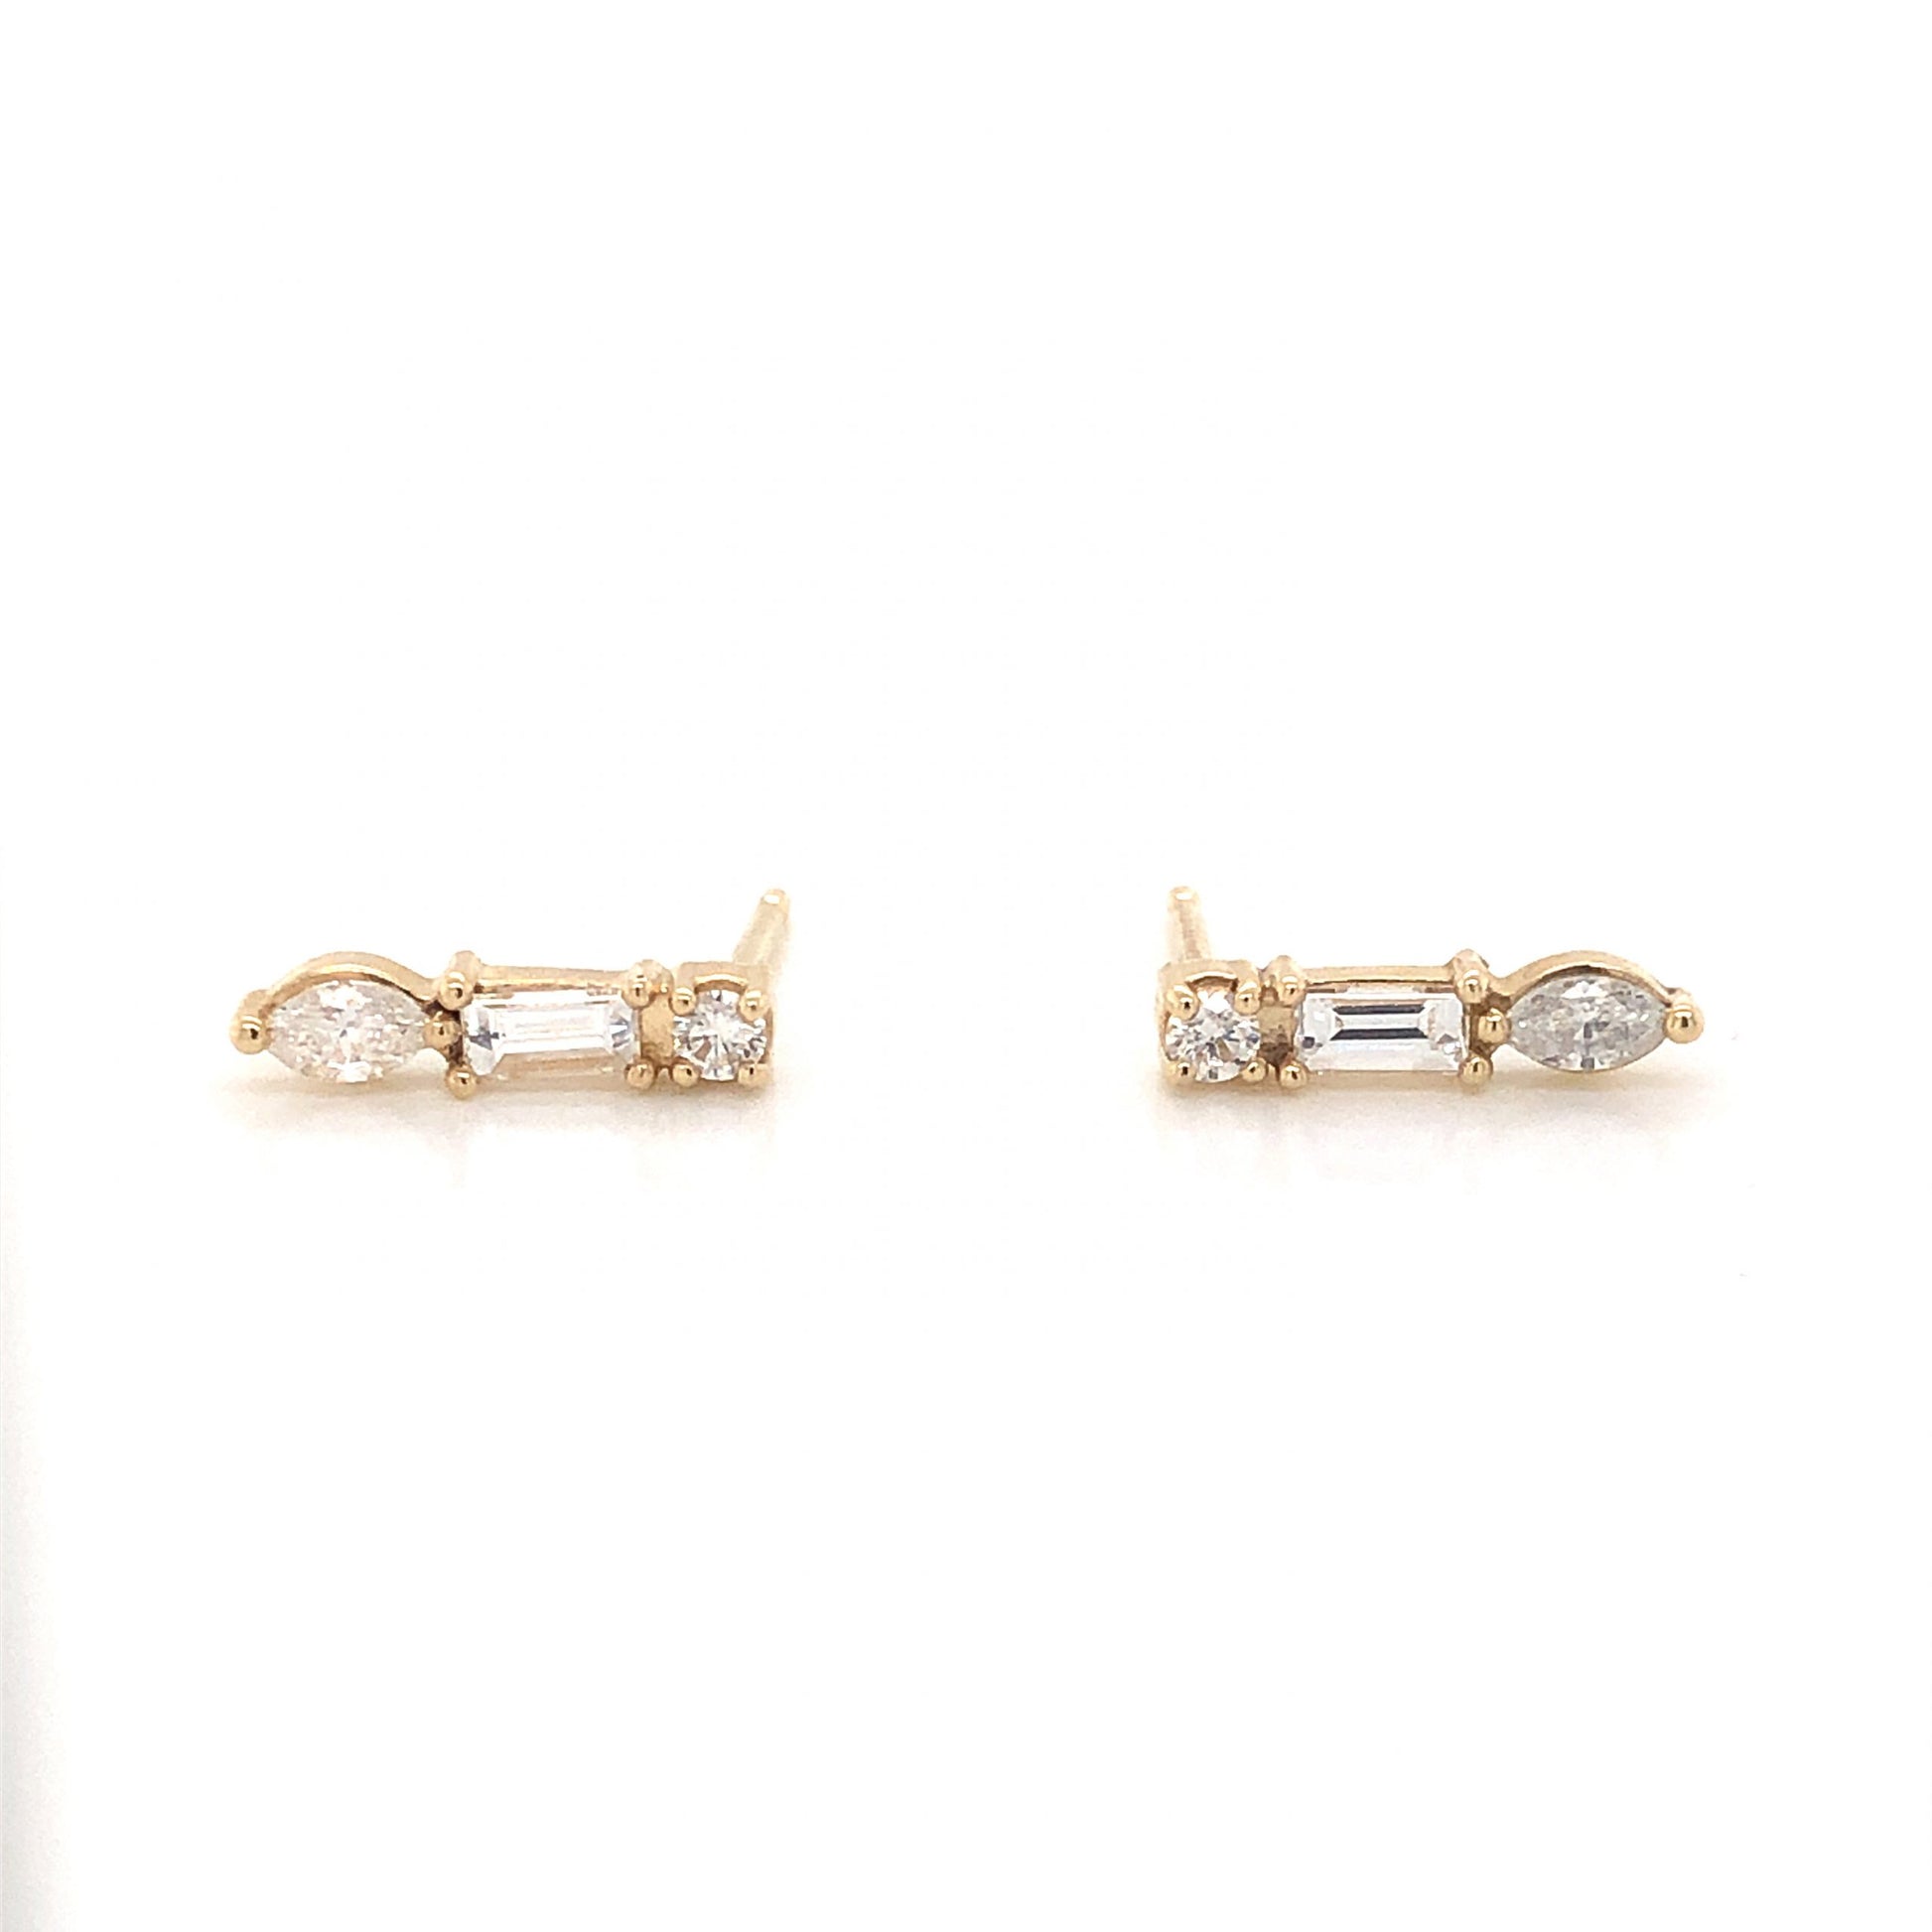 Stacked Diamond Stud Earrings in 14K Yellow GoldComposition: 14 Karat Yellow Gold Total Diamond Weight: .34ct Total Gram Weight: .90 g Inscription: 14k
      